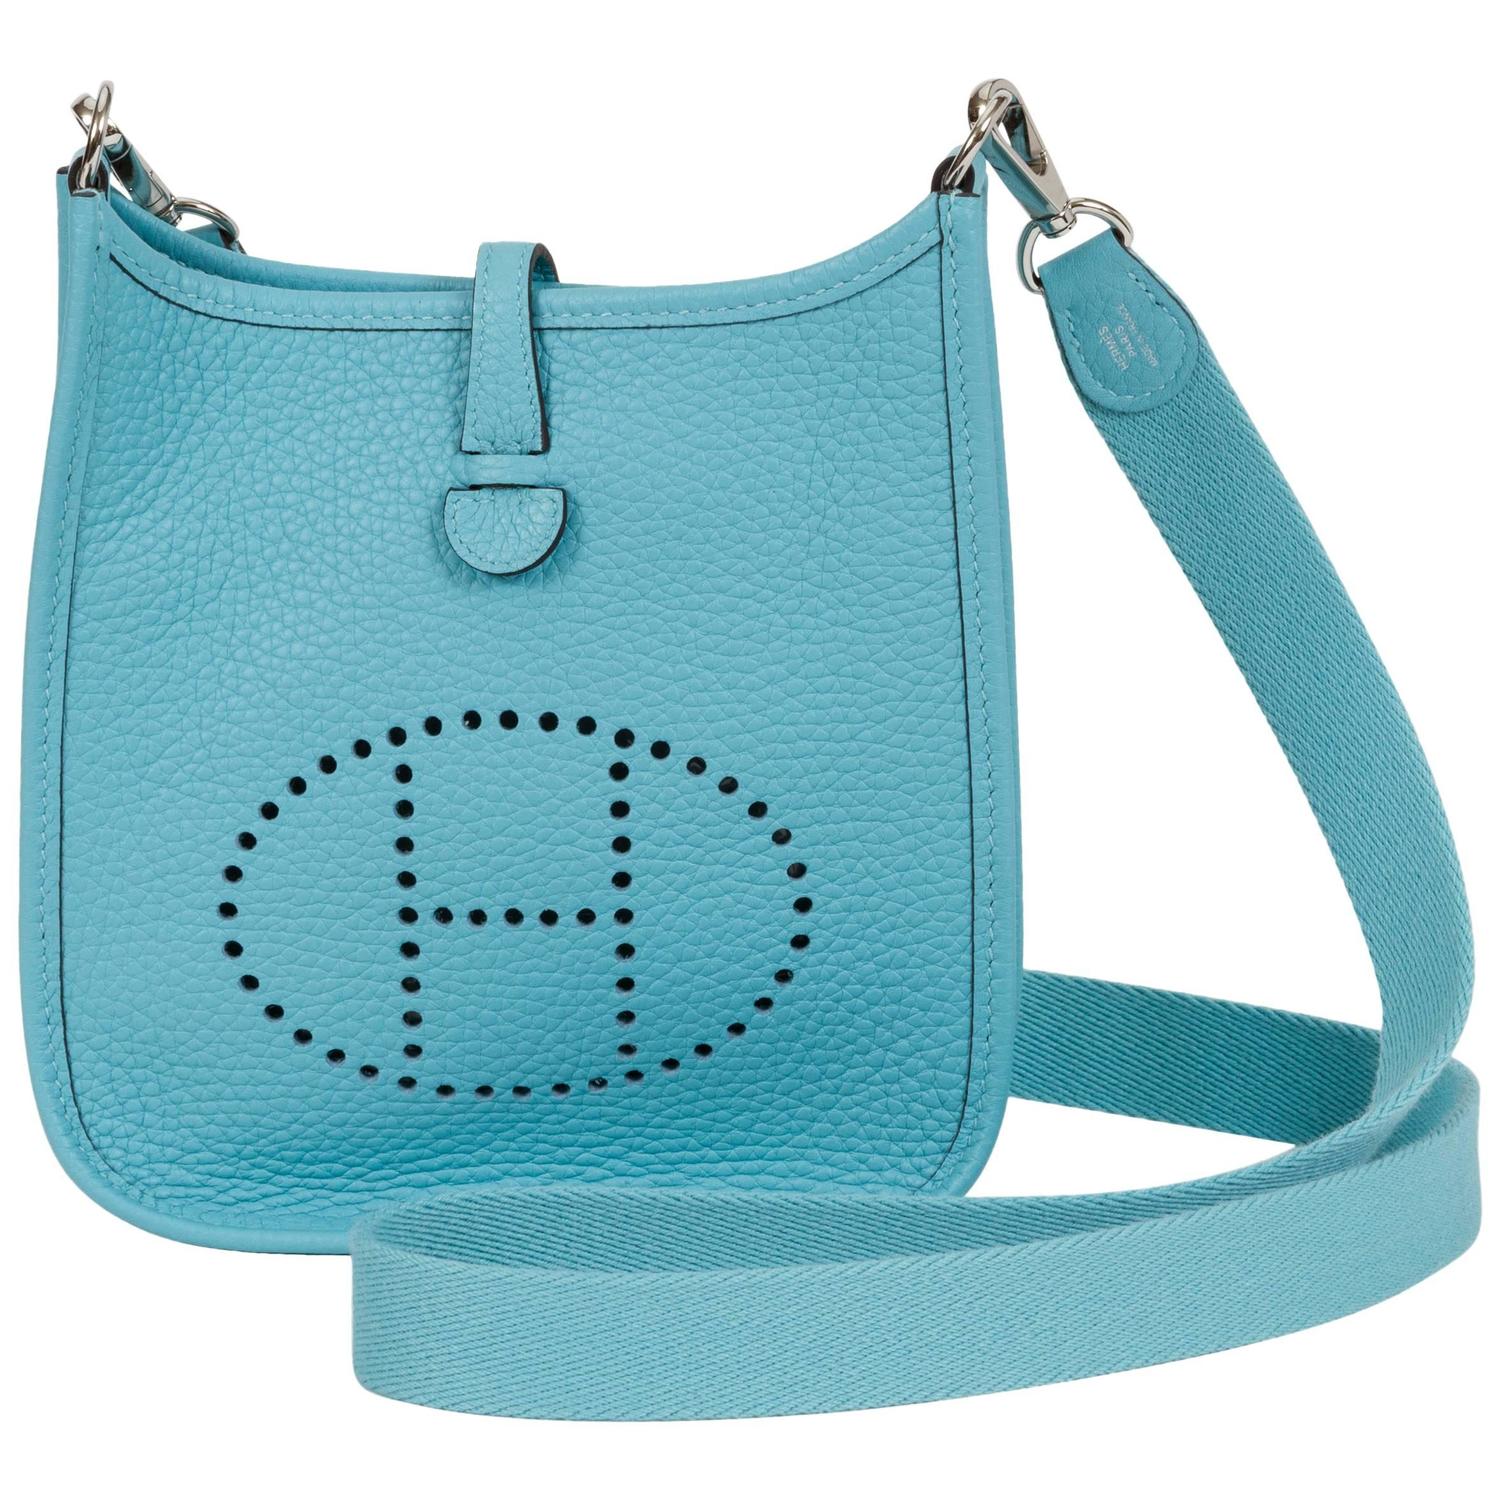 New in Box Hermès Mini Evelyne Blue Atolle Bag For Sale at 1stdibs